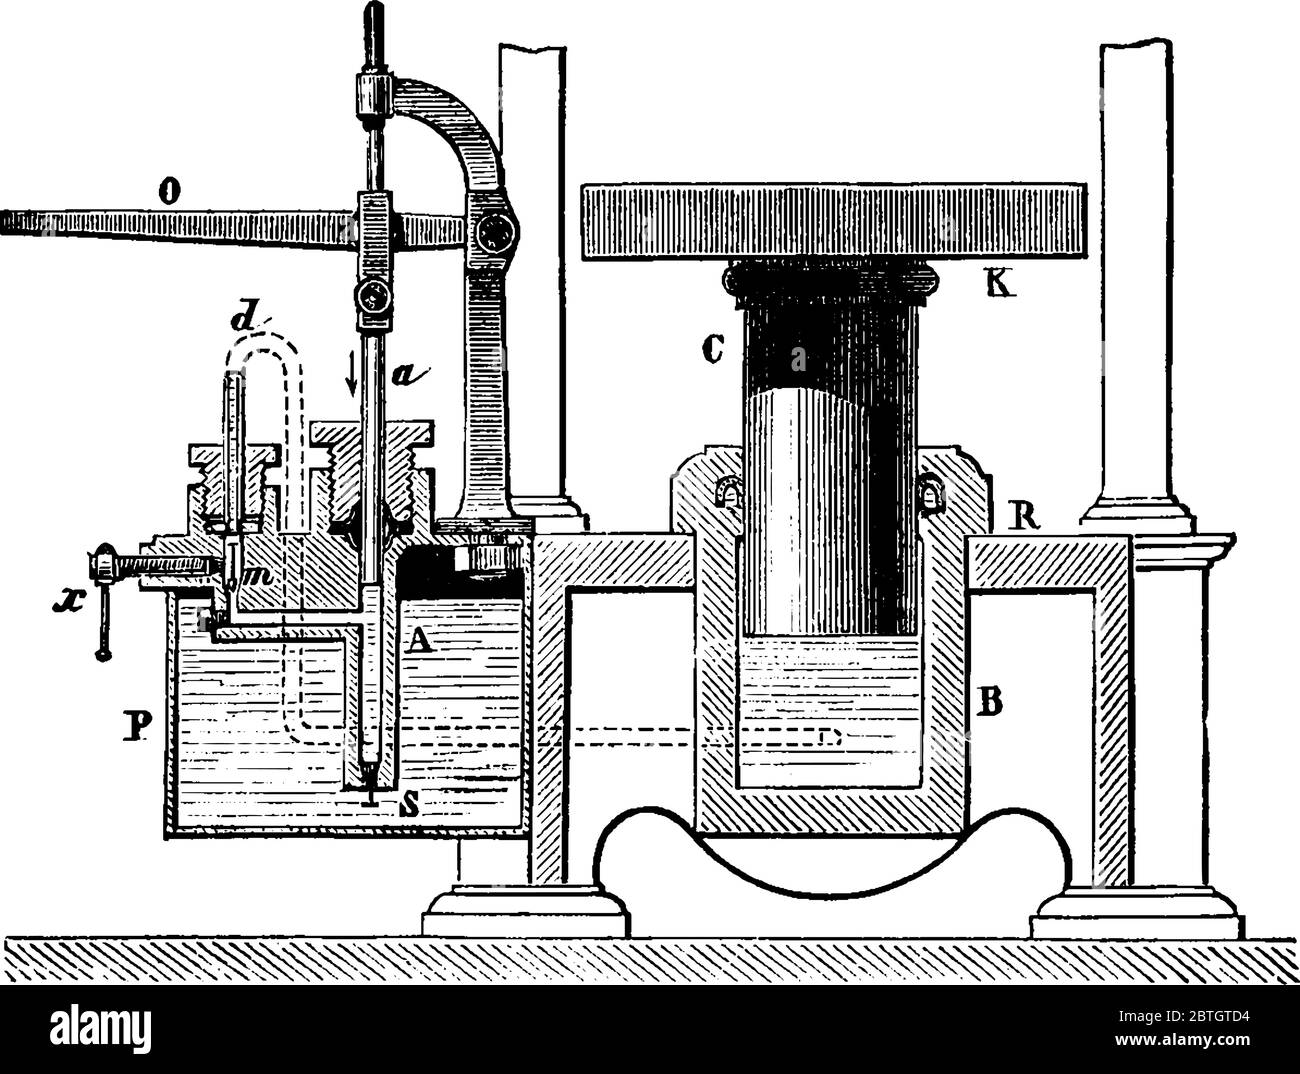 In hydraulic press, the pressure of a piston operated by a lever is transmitted through a pipe to a piston of larger area, vintage line drawing or eng Stock Vector